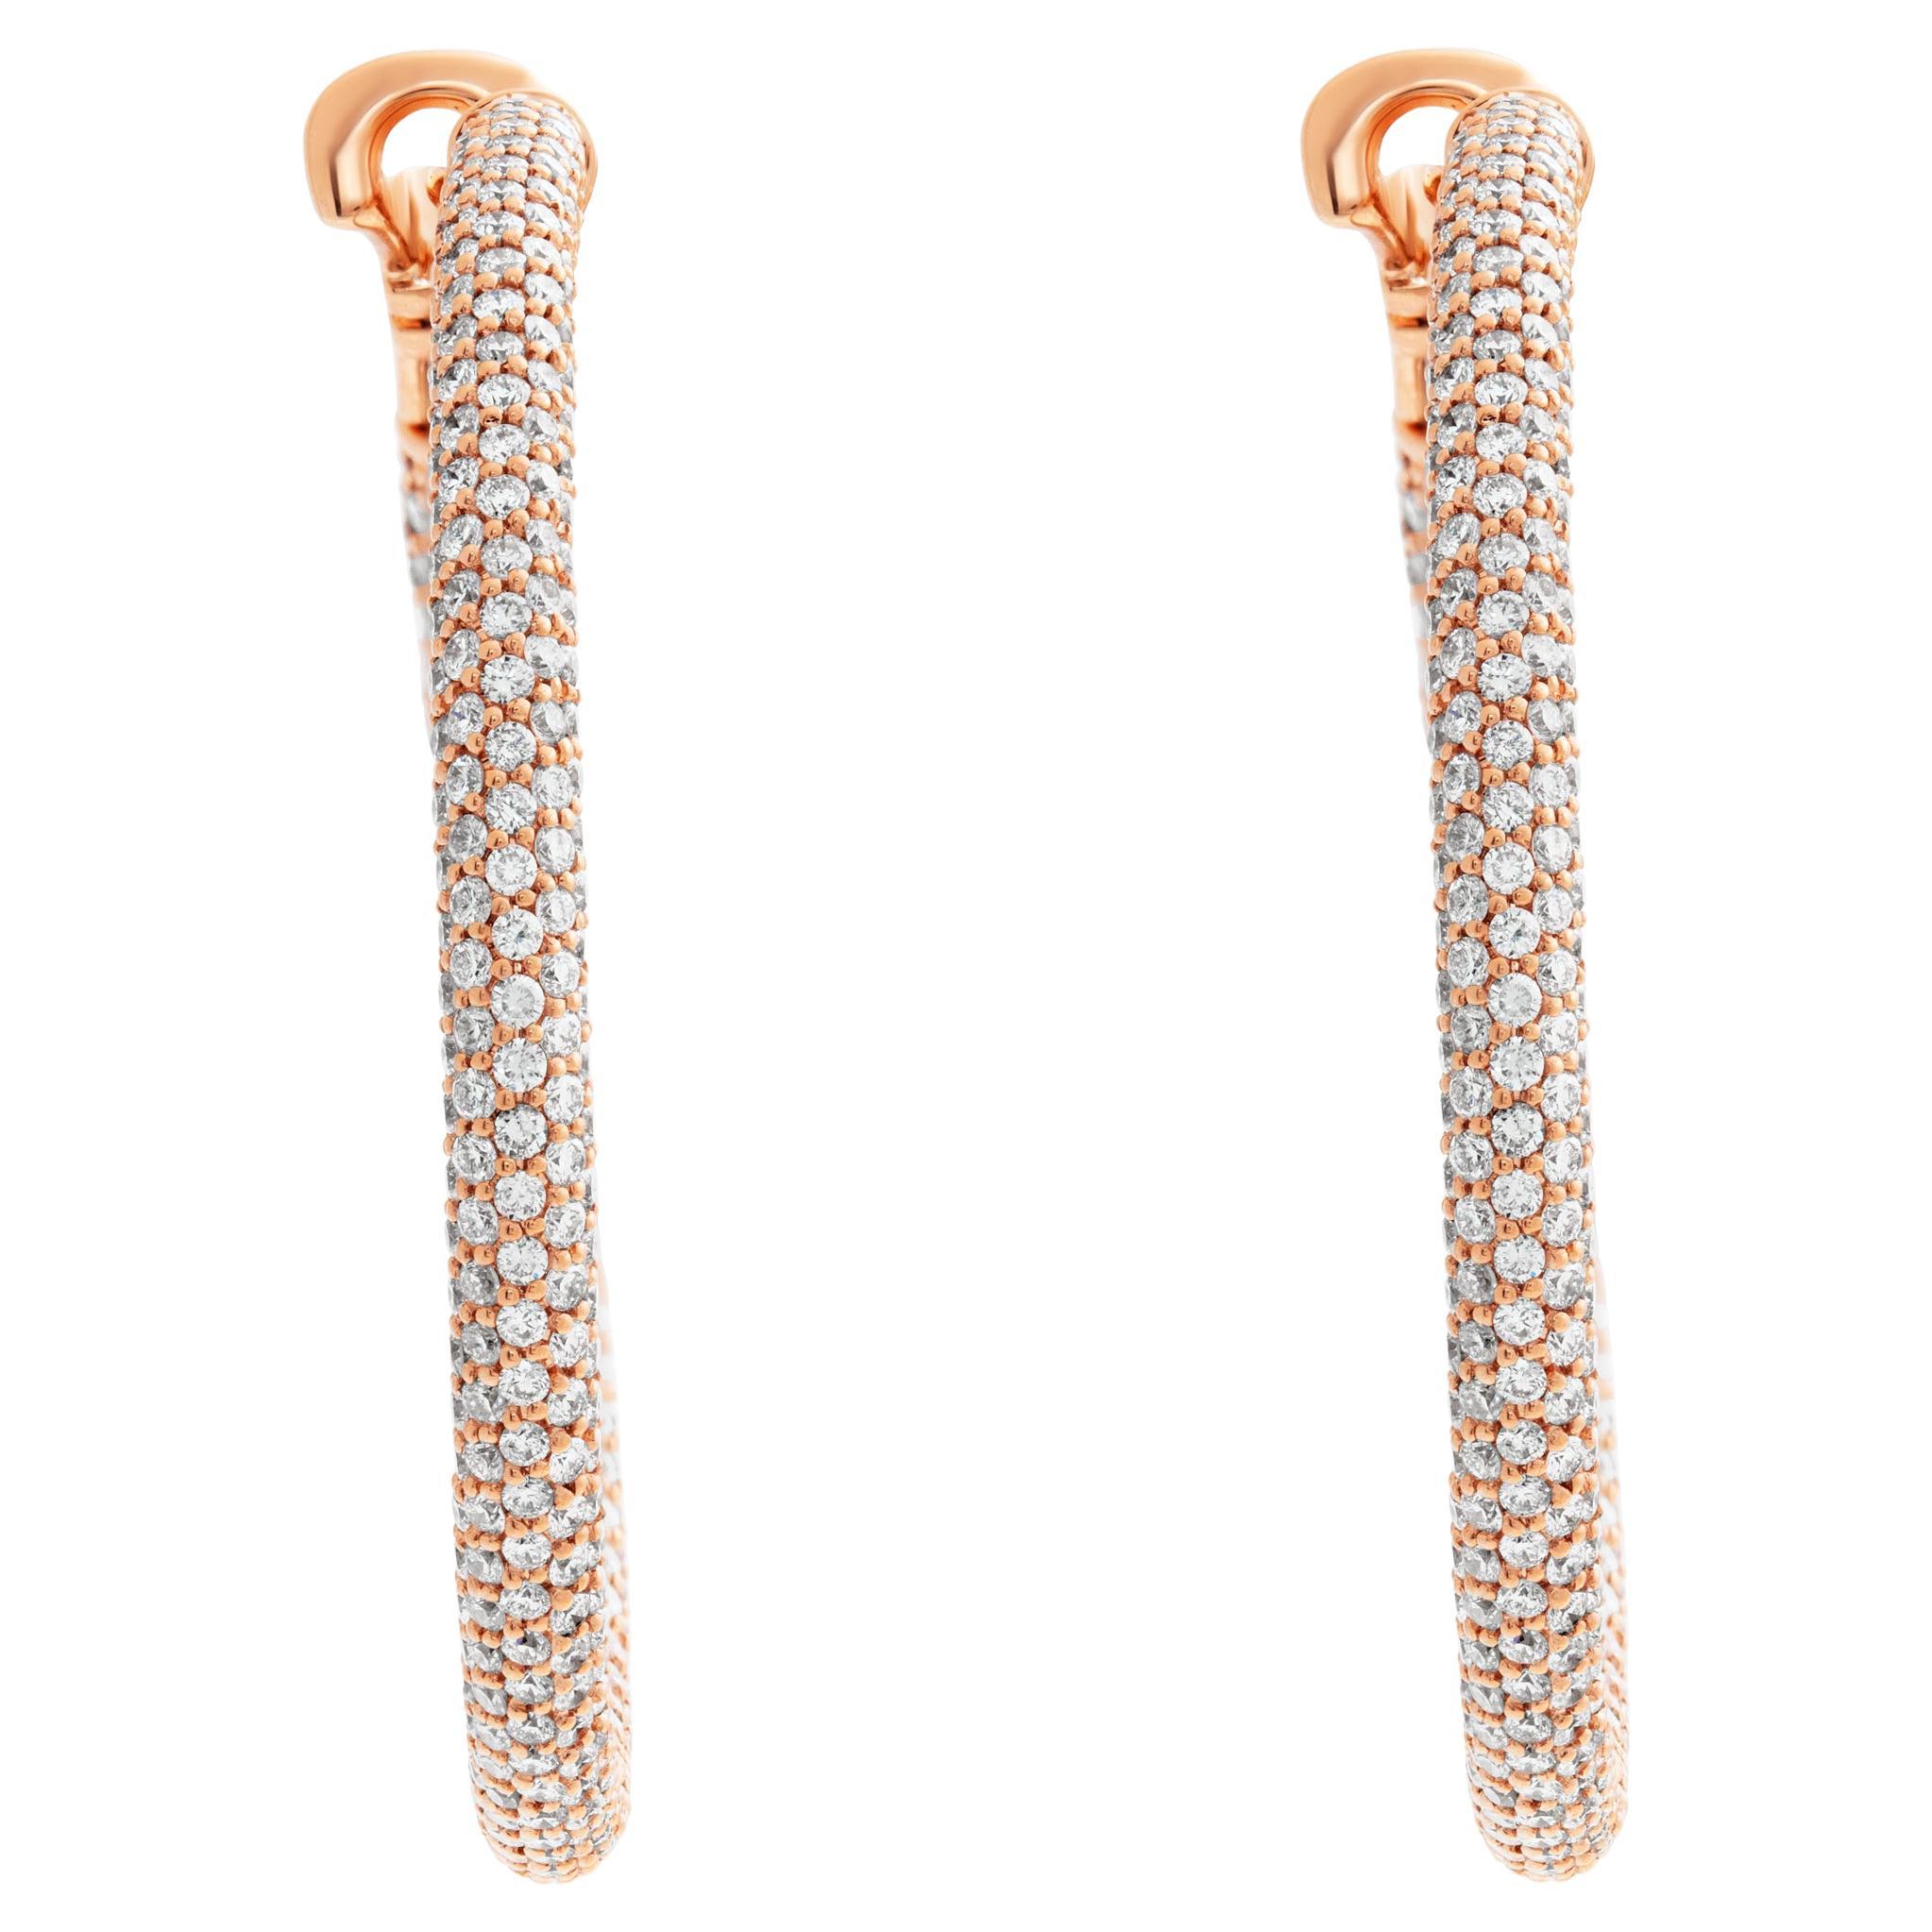 18k rose gold pave hoop earrings with 6.90 carats in round brilliant cut diamond For Sale